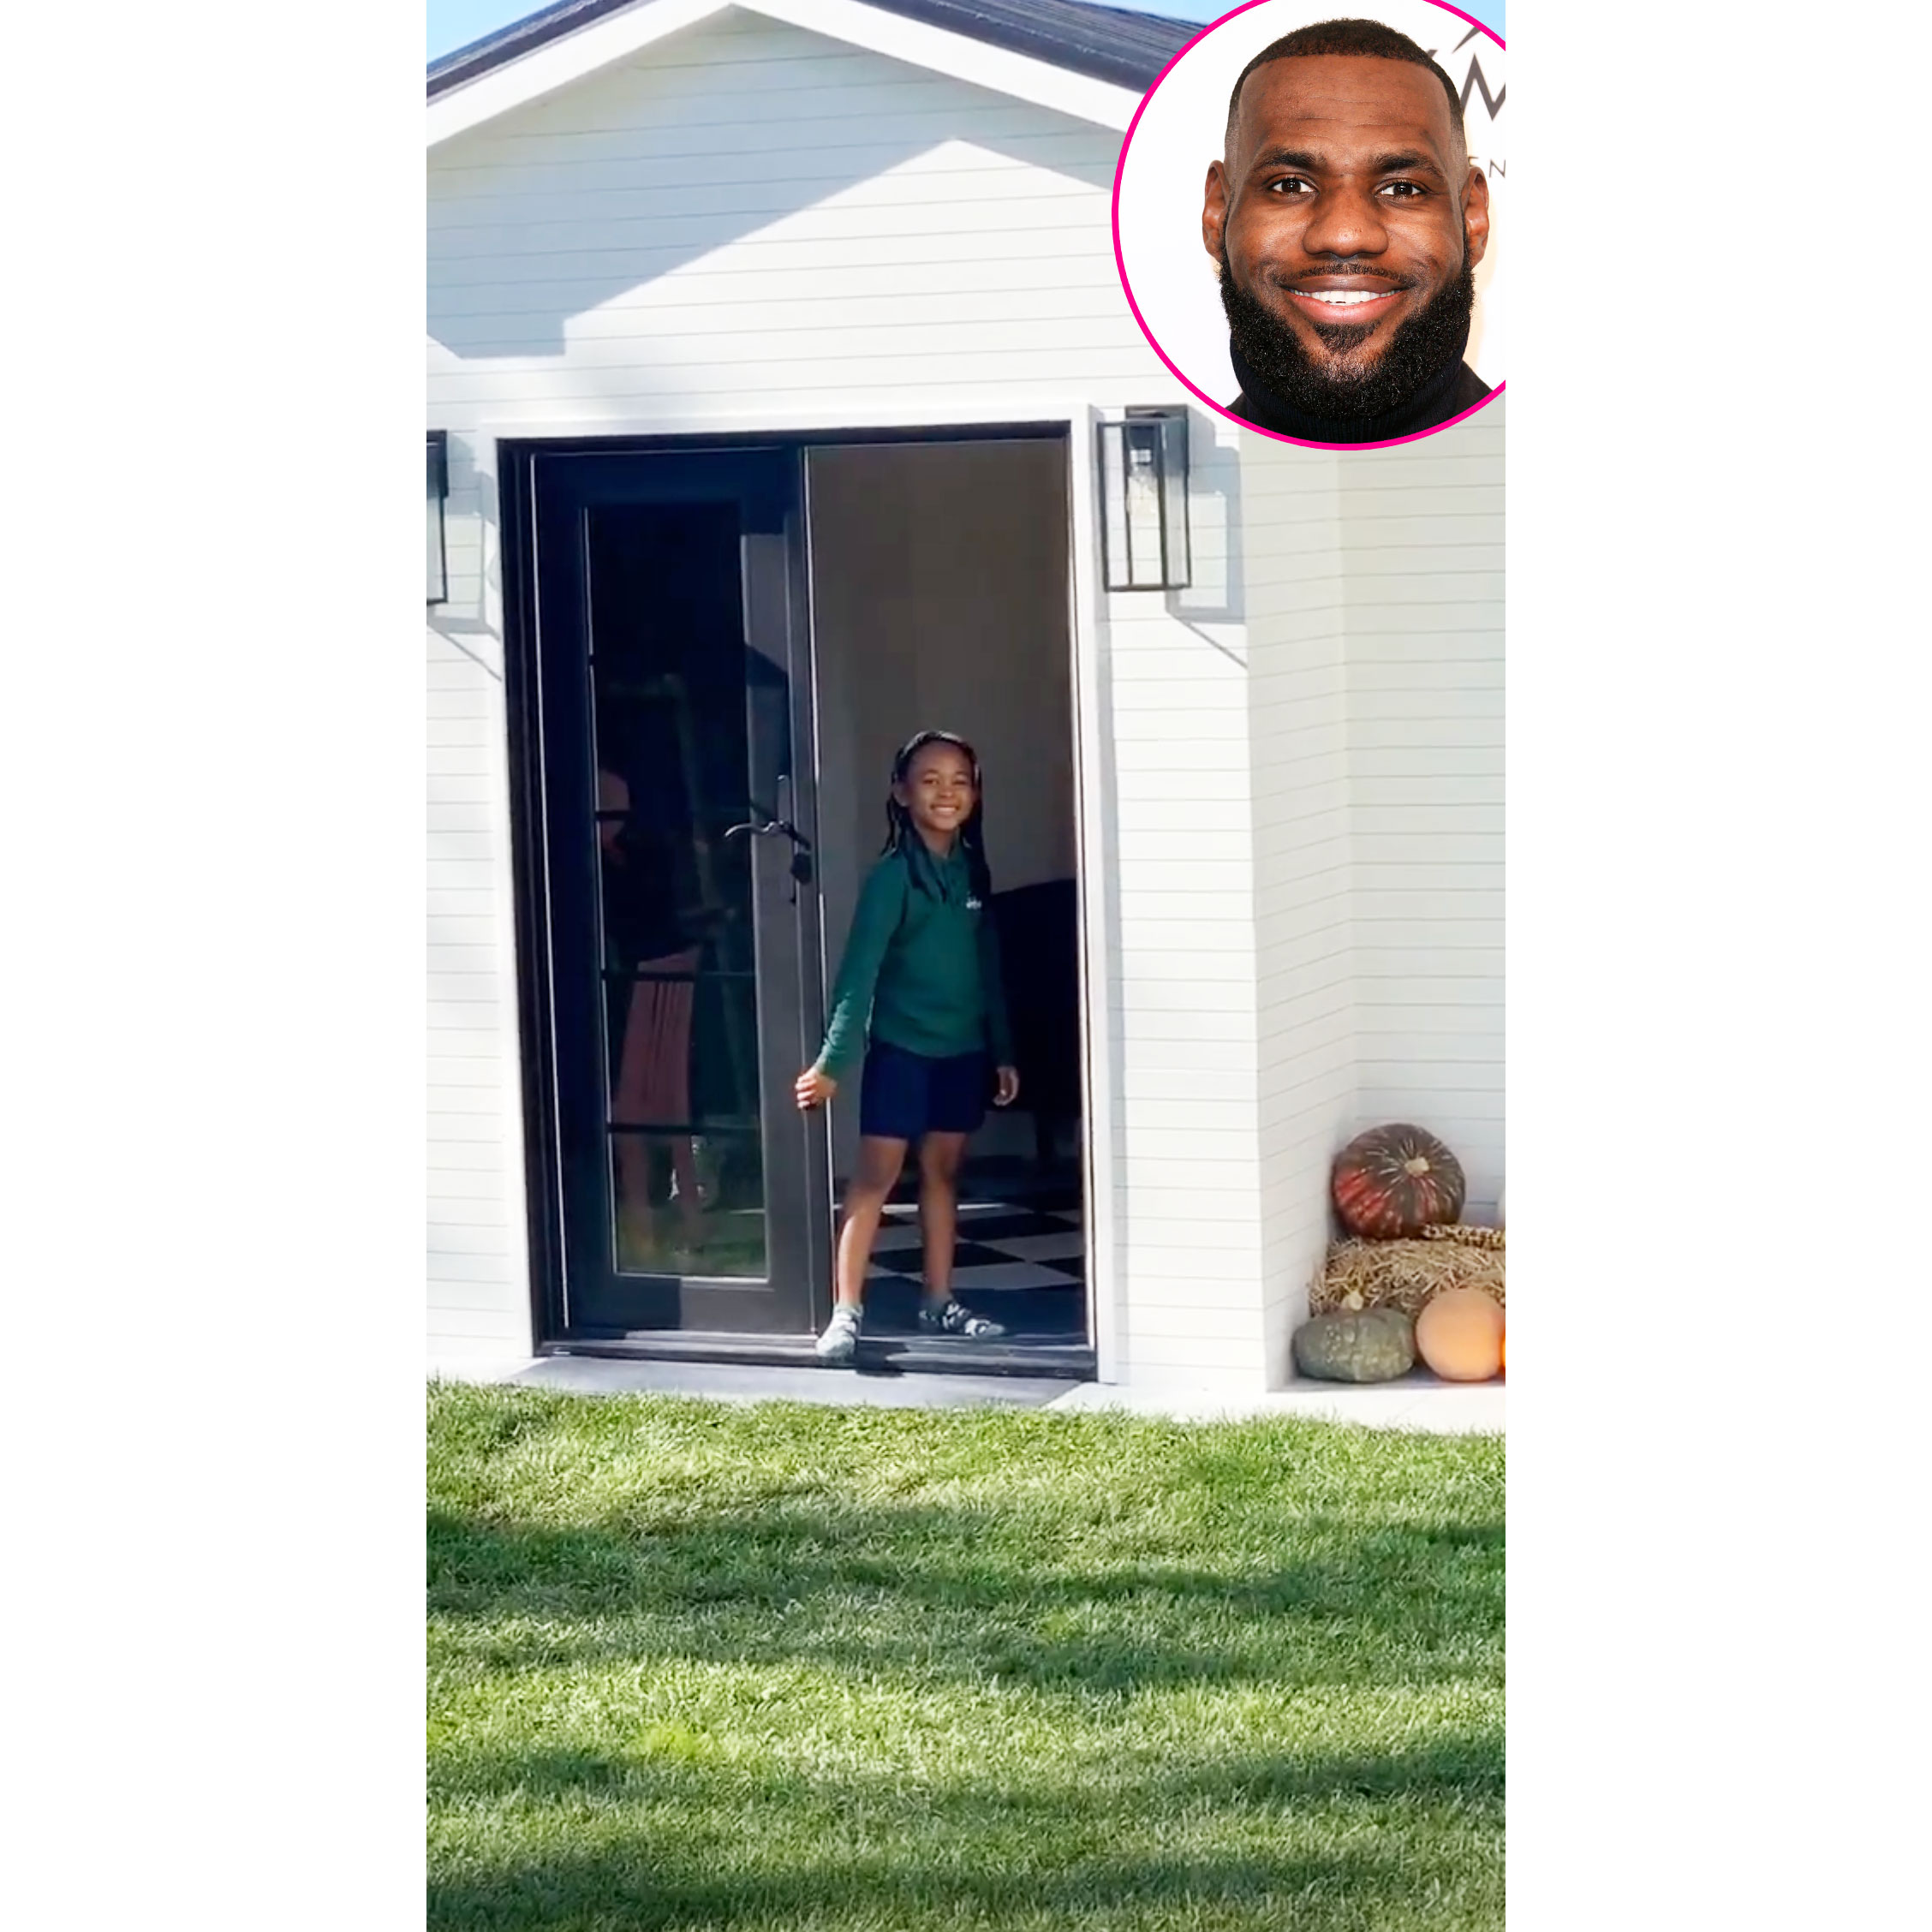 At Home With LeBron James and His Family